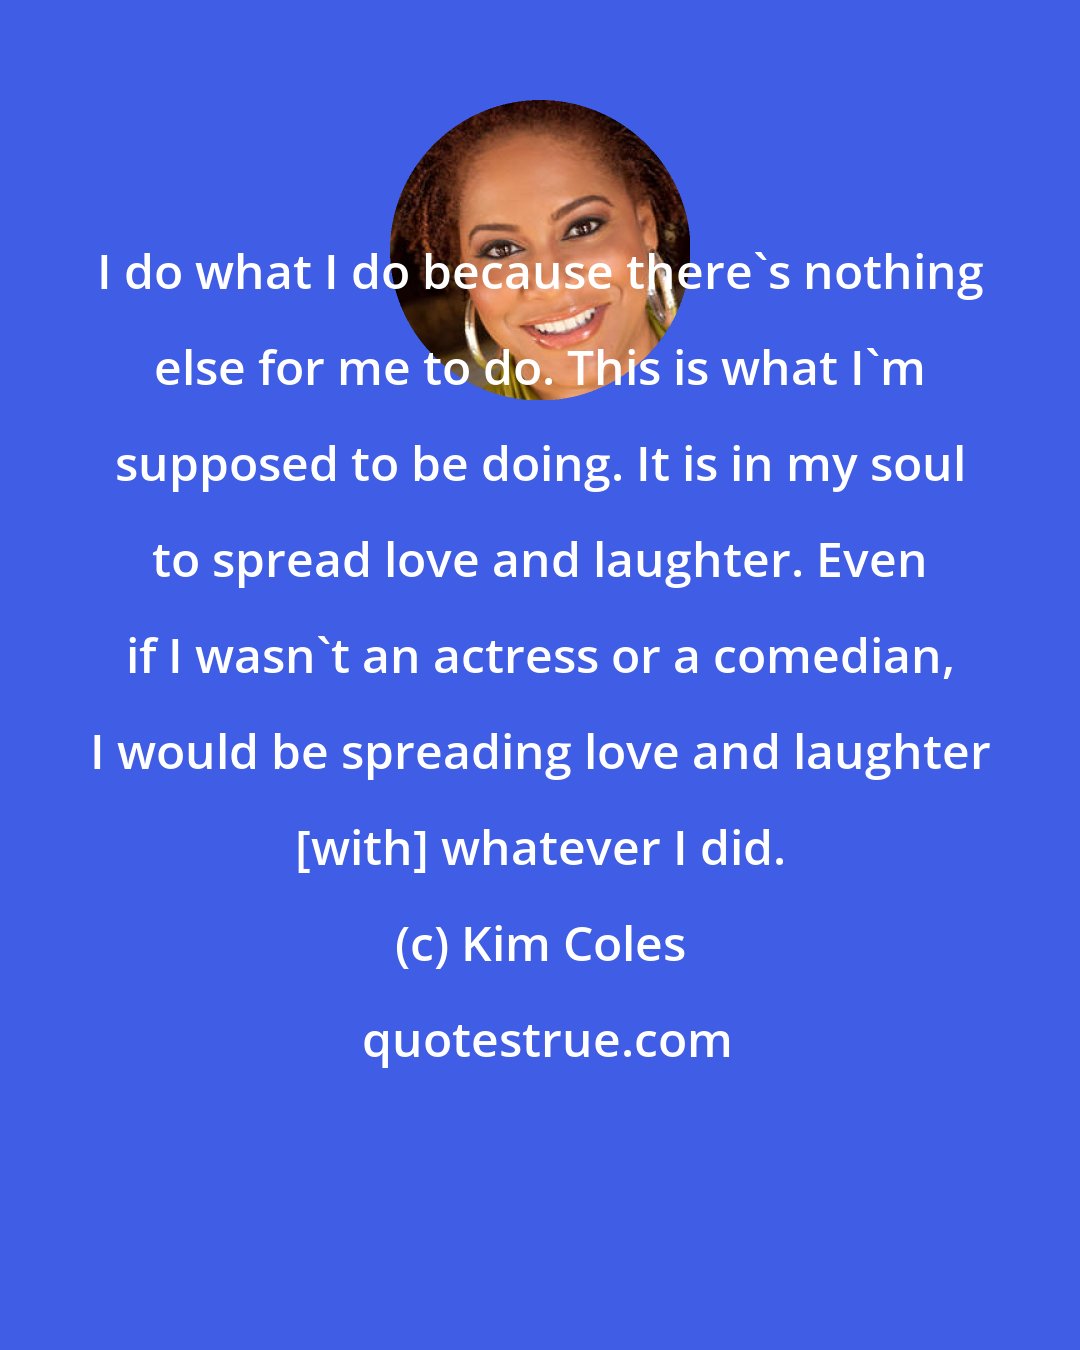 Kim Coles: I do what I do because there's nothing else for me to do. This is what I'm supposed to be doing. It is in my soul to spread love and laughter. Even if I wasn't an actress or a comedian, I would be spreading love and laughter [with] whatever I did.